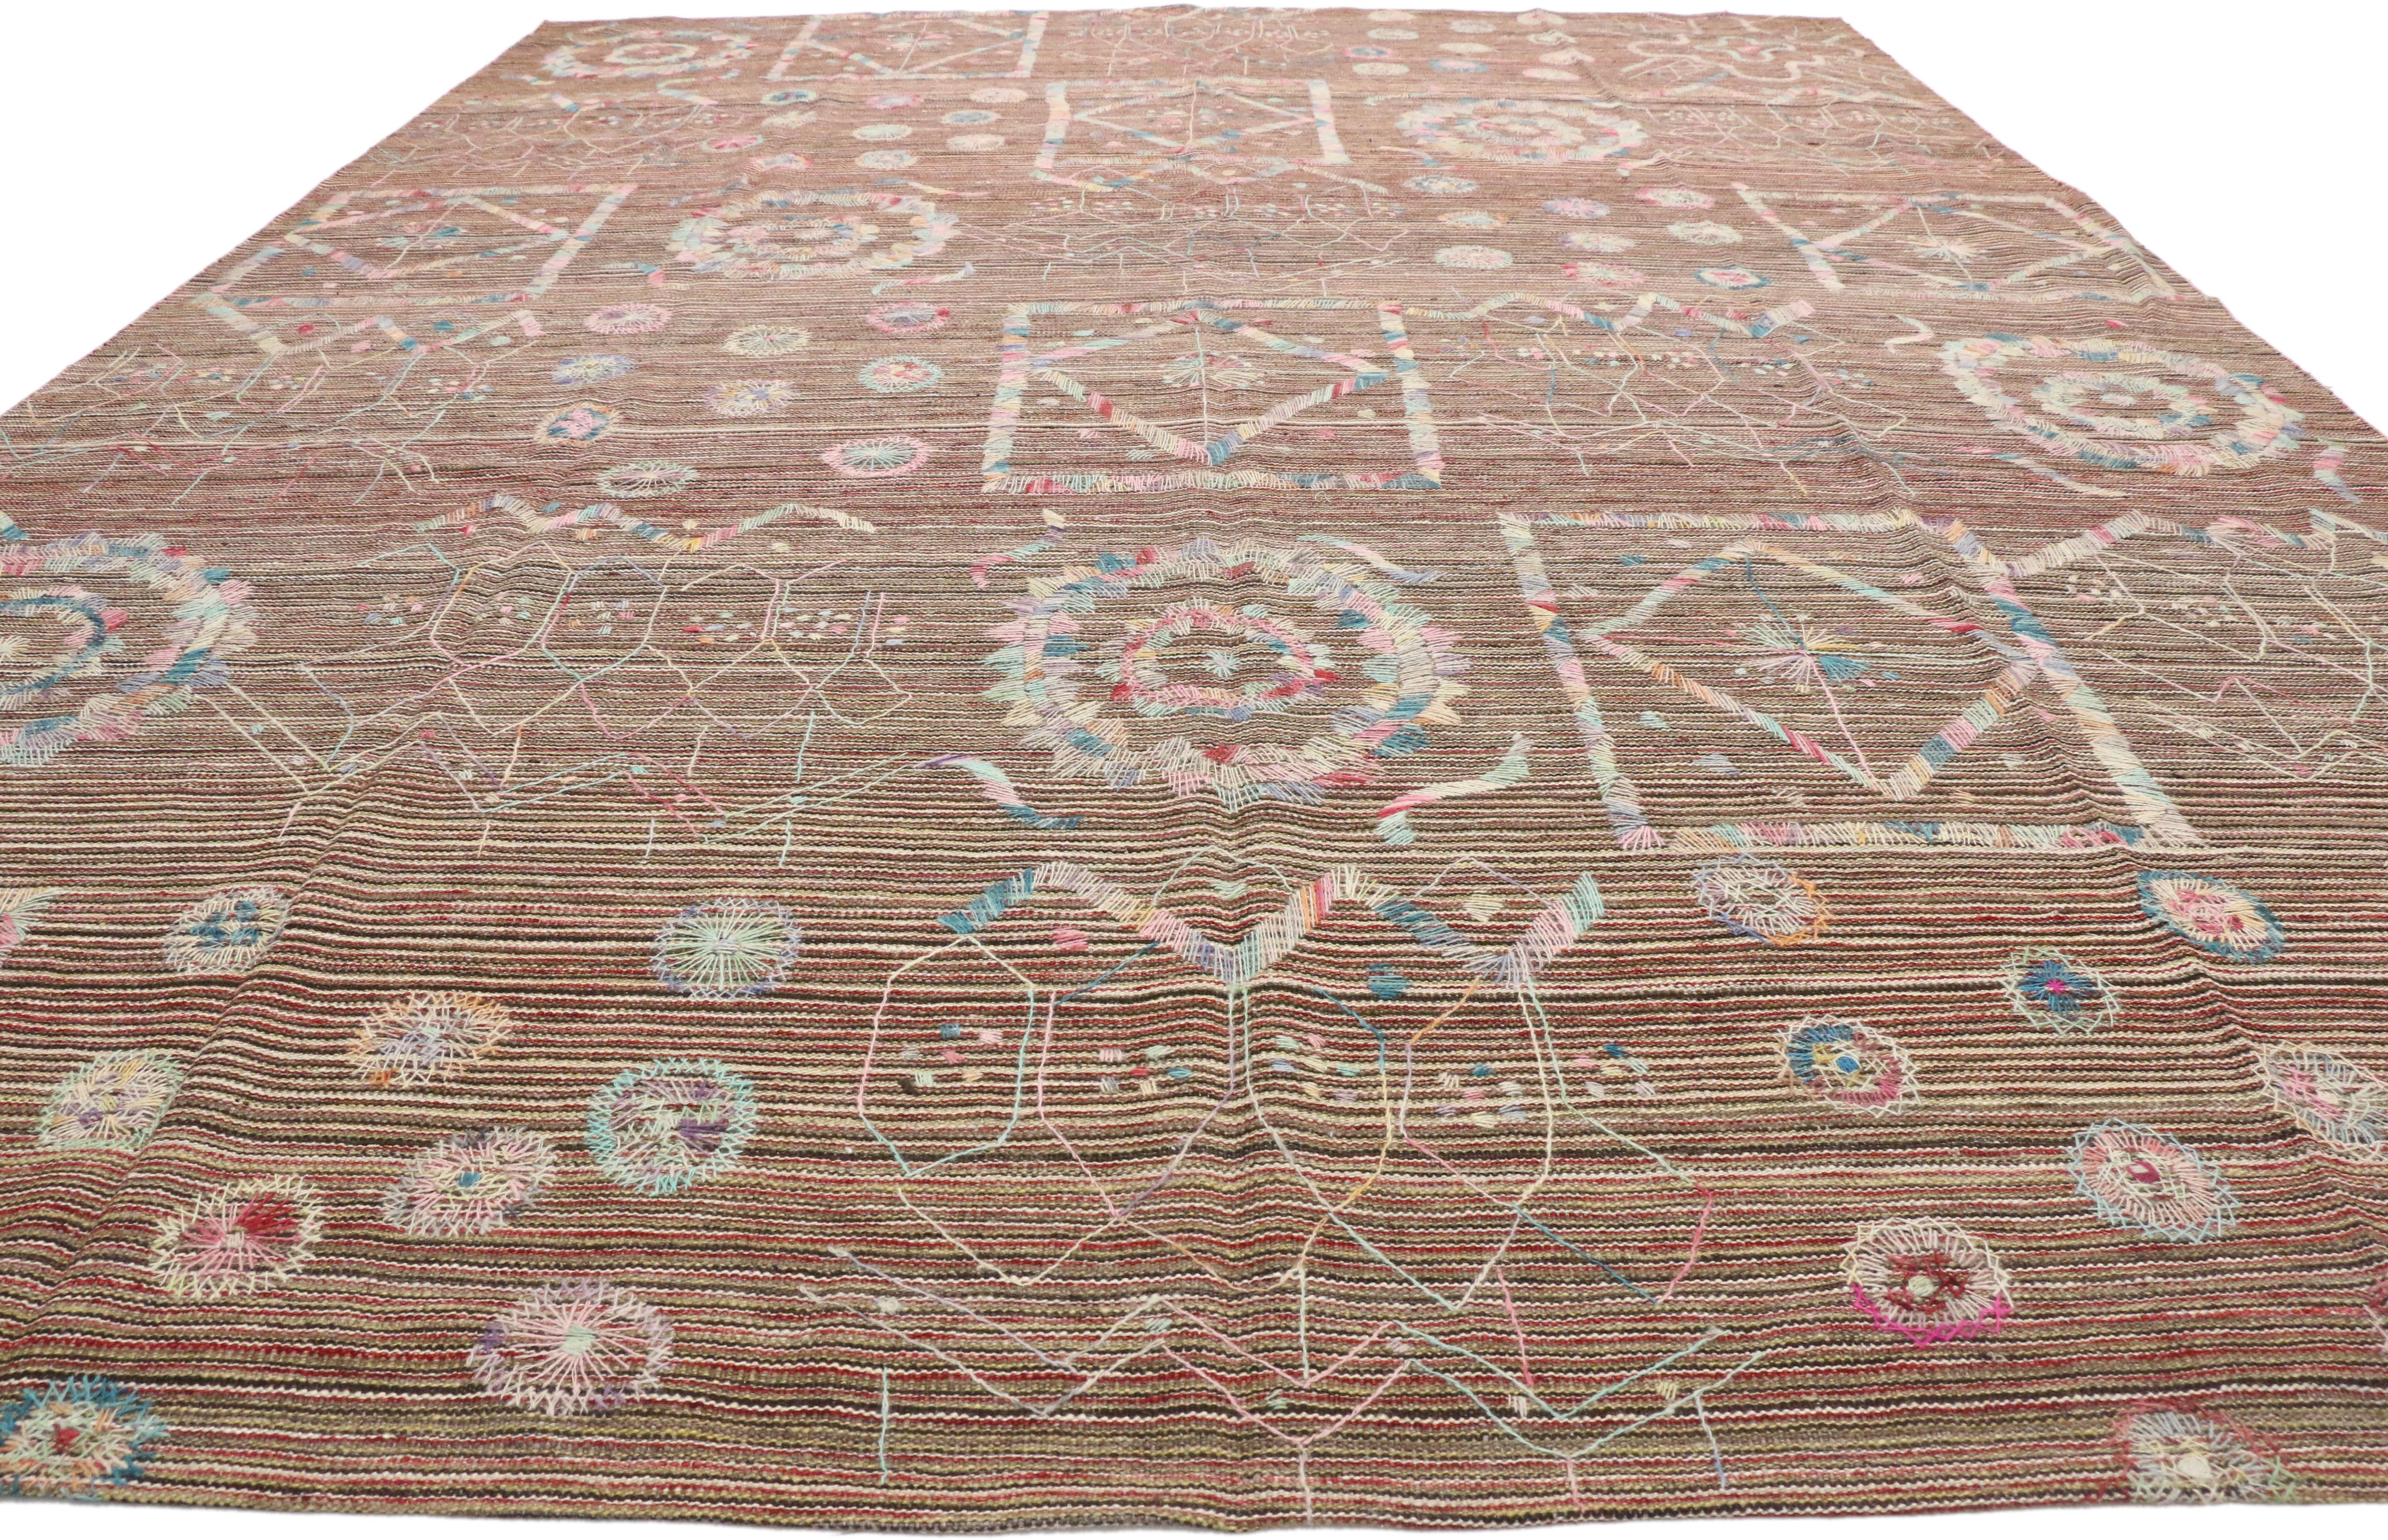 Bohemian Vintage Flatweave Kilim Rug with Embroidered Suzani Design in Soft Pastel Colors